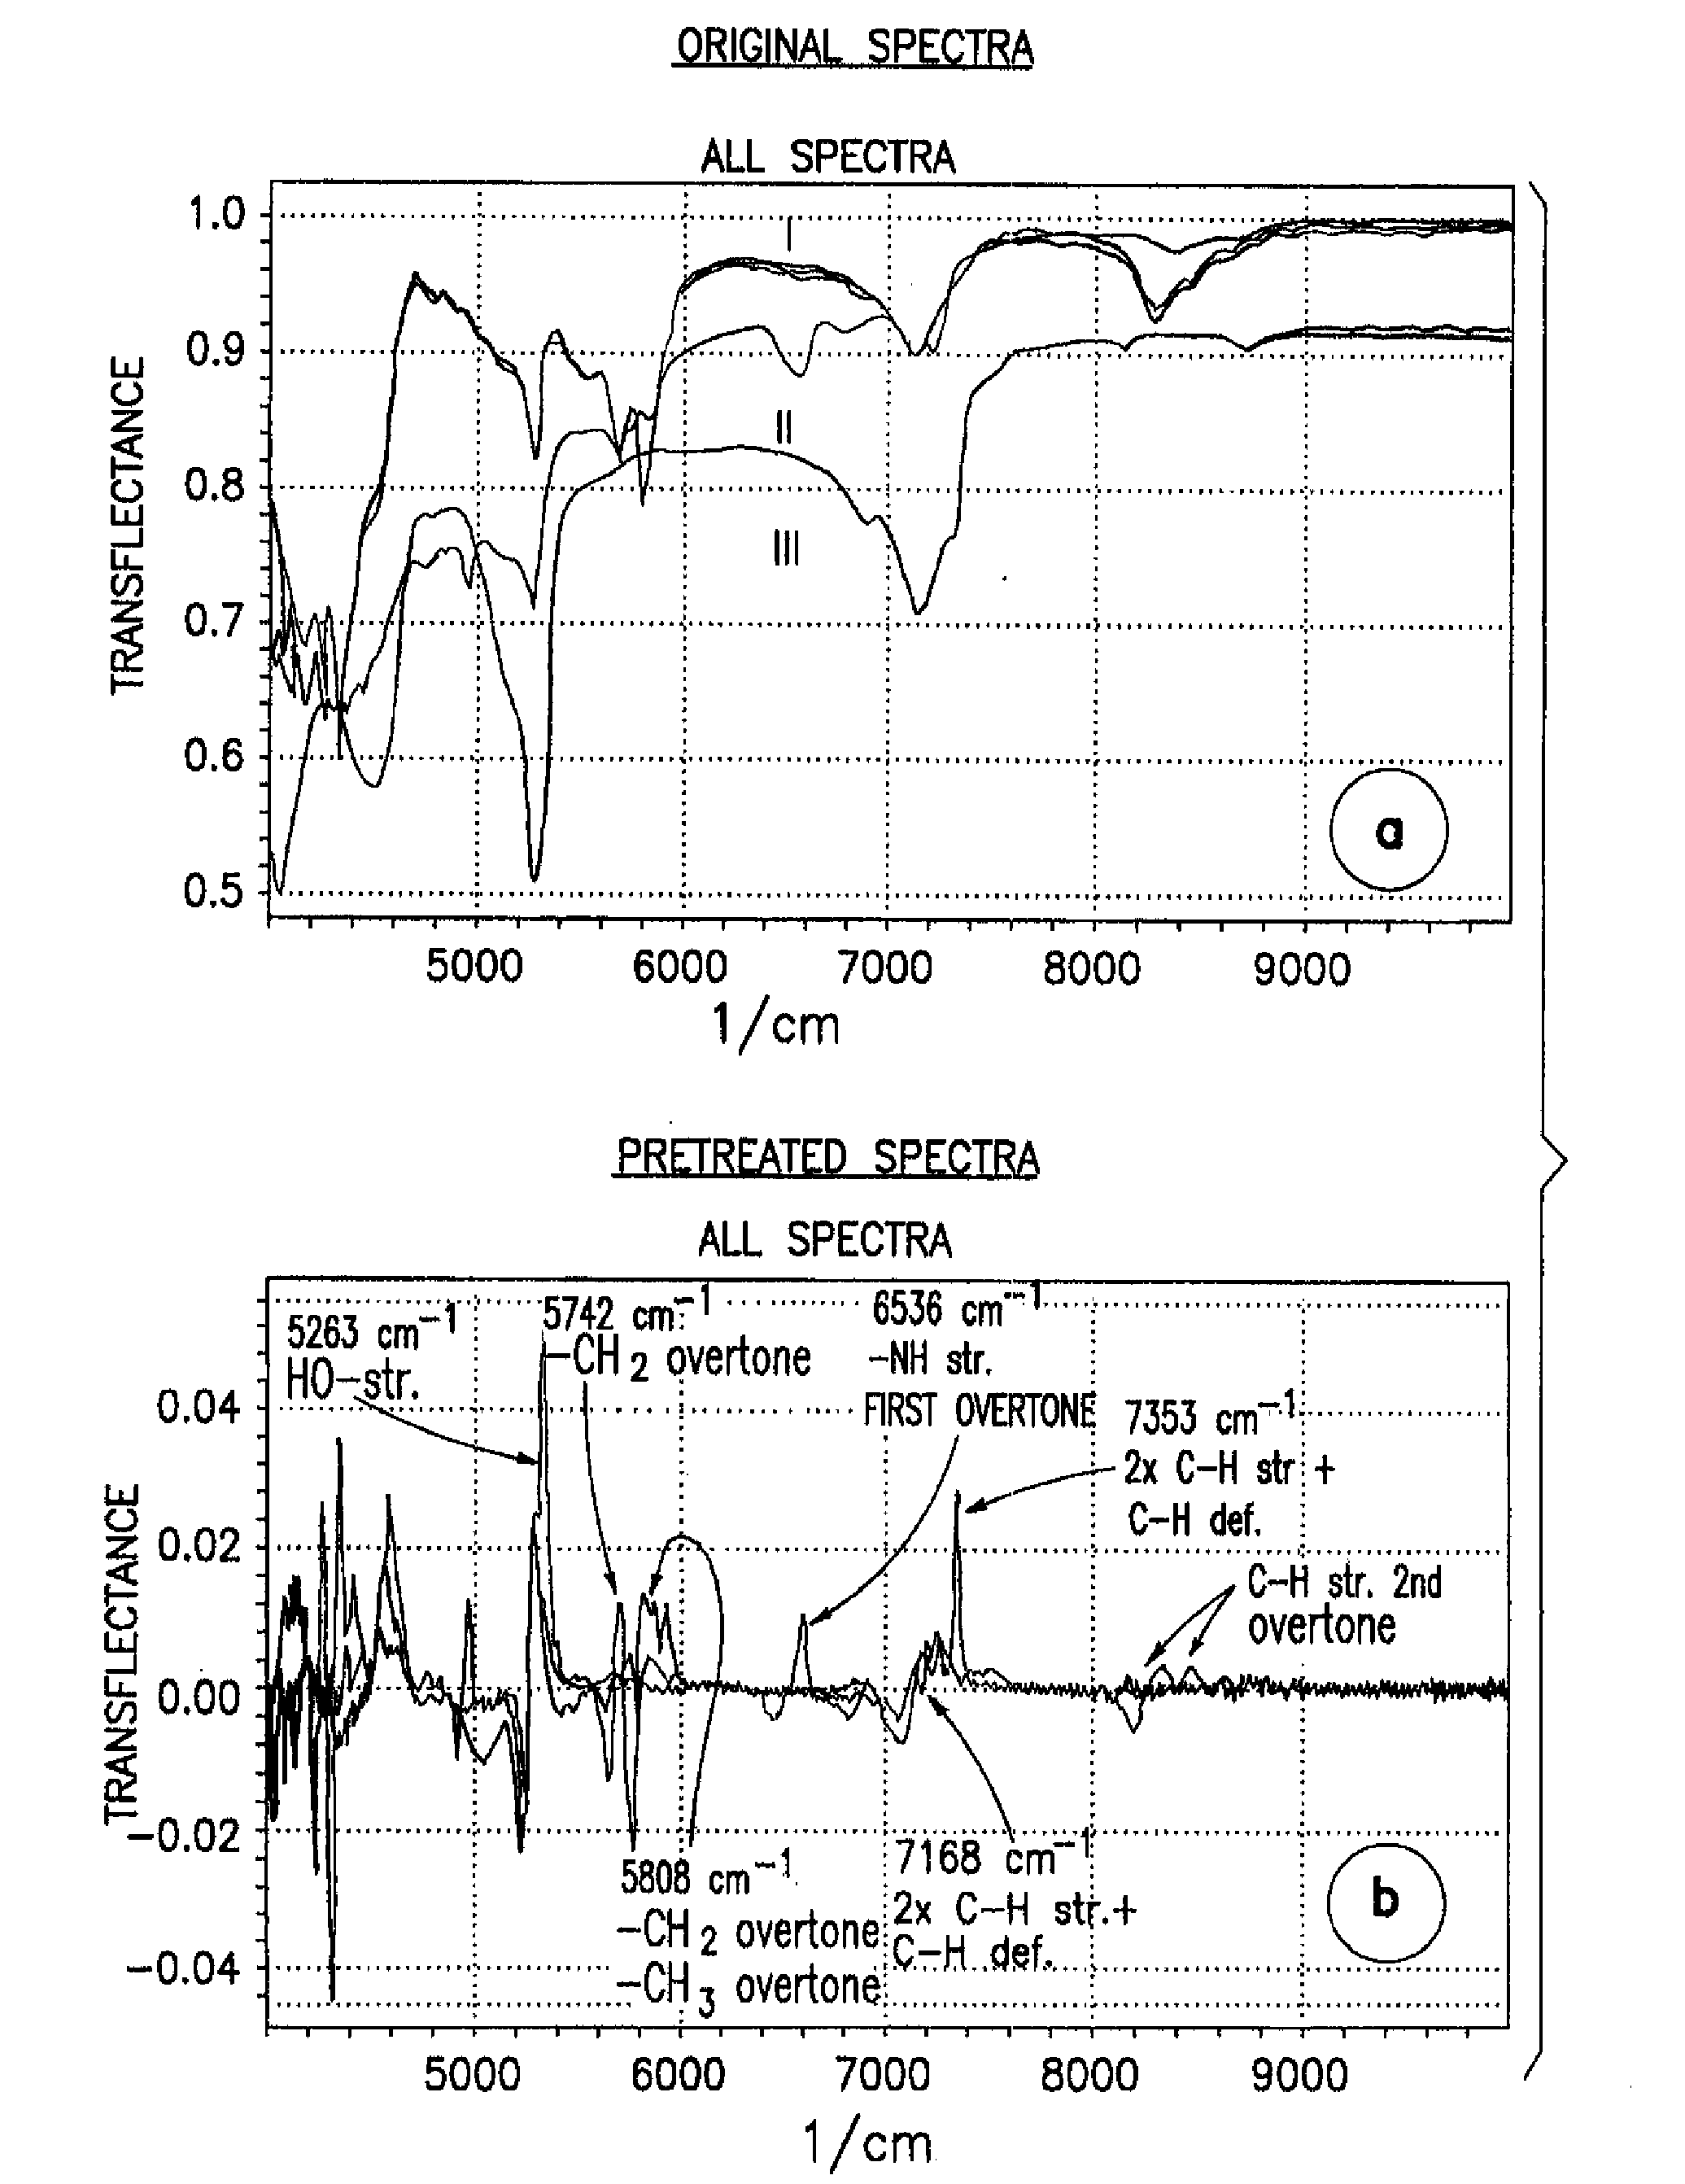 Method for classifying scientific materials such as silicate materials, polymer materials and/or nanomaterials